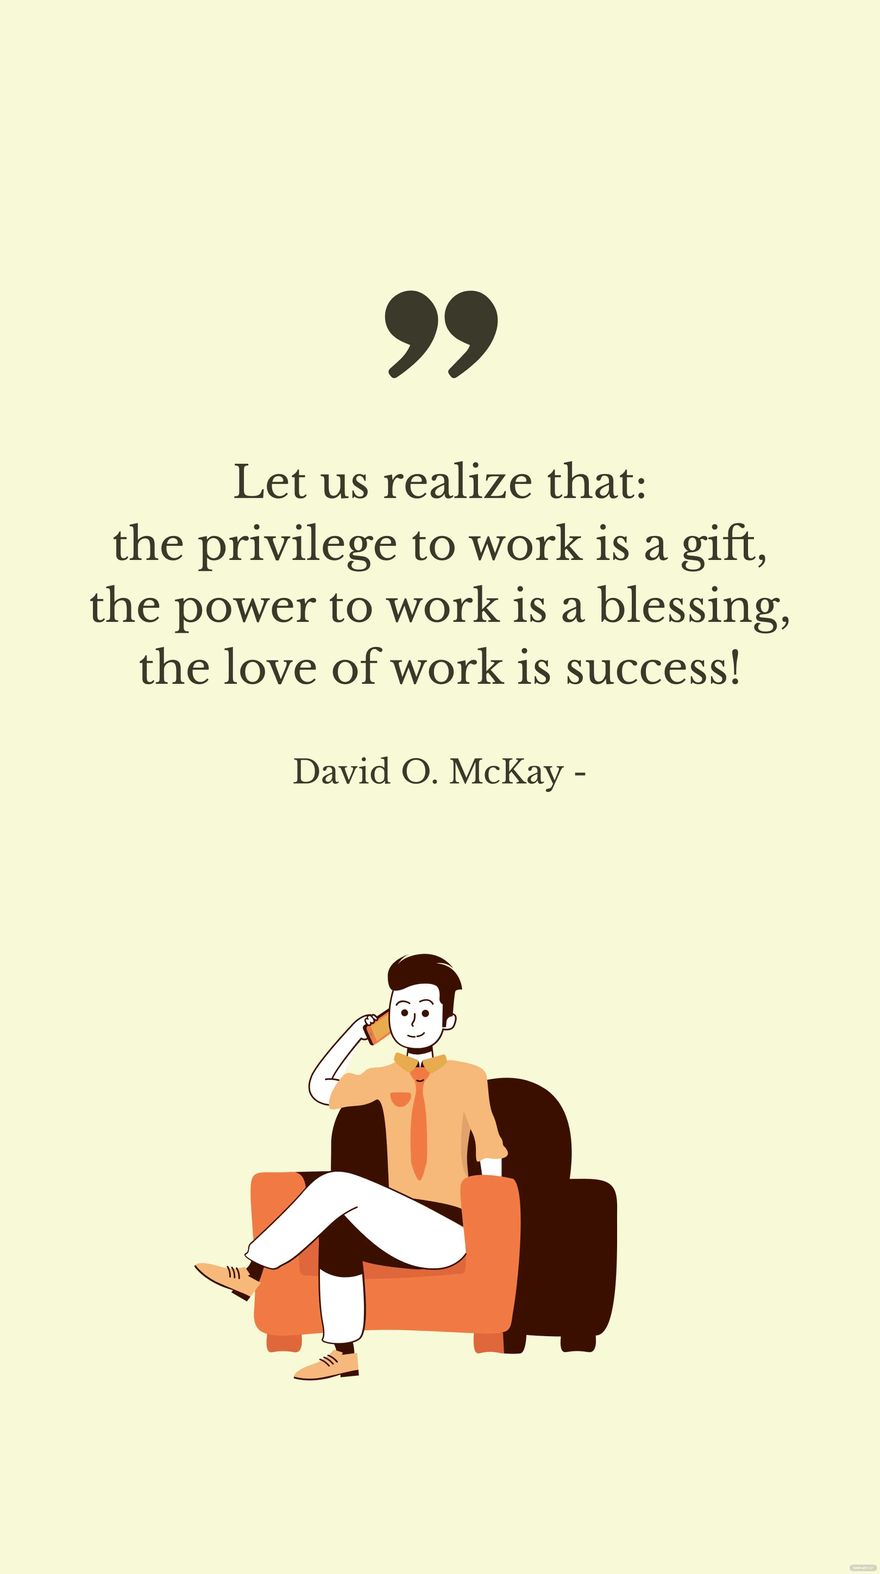 David O. McKay - Let us realize that: the privilege to work is a gift, the power to work is a blessing, the love of work is success! in JPG